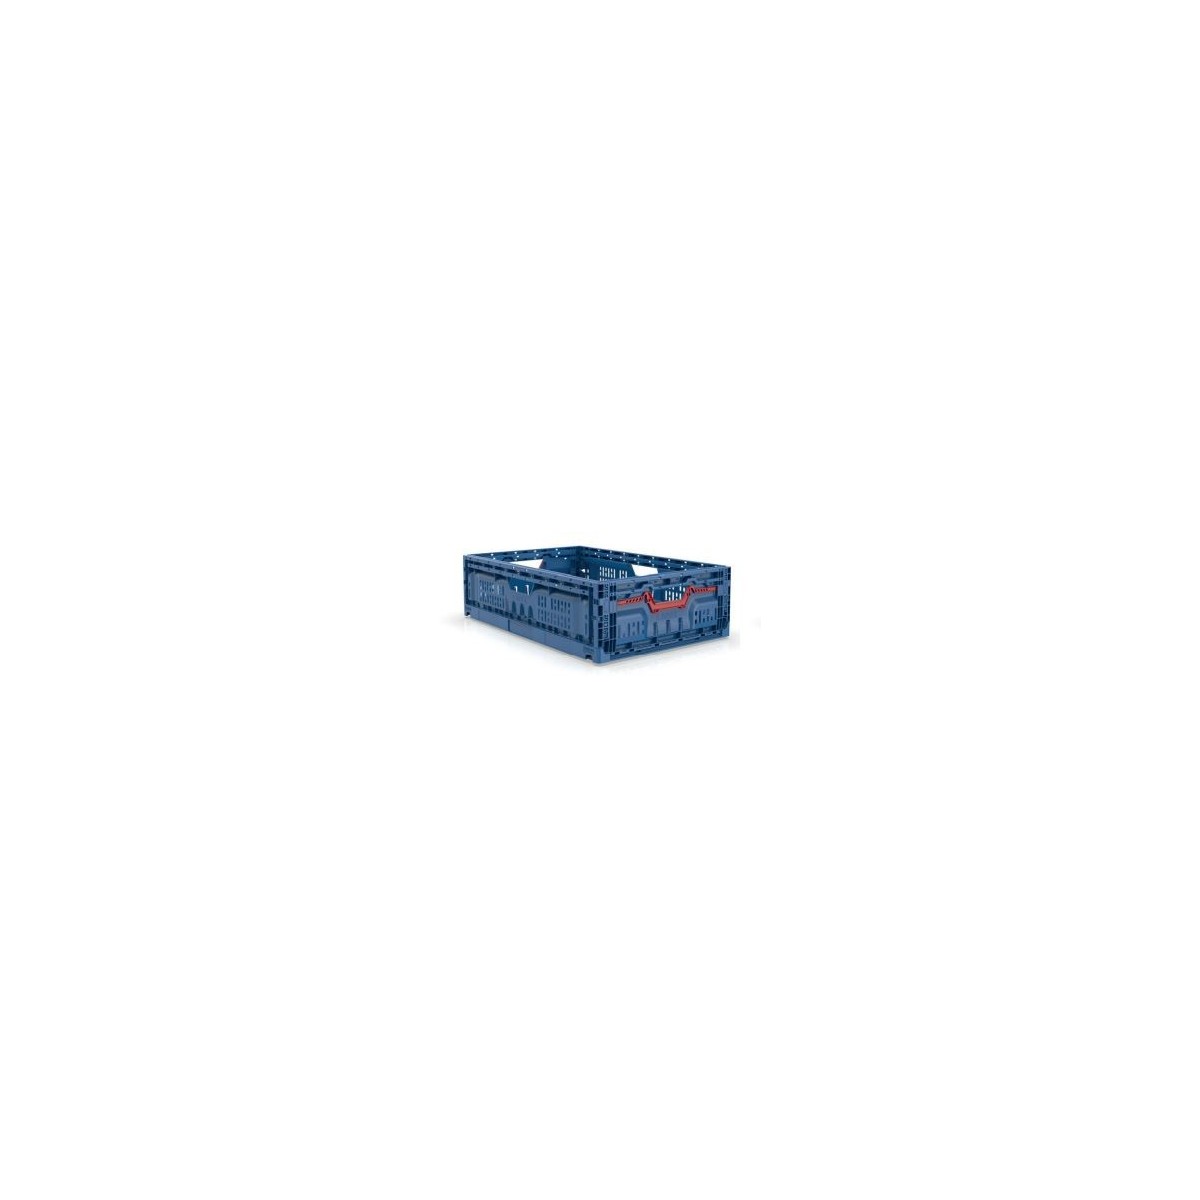 FOLDING CONTAINER EURONORM 60X40X17CM BLUE PERFORATED VOLUME 33L